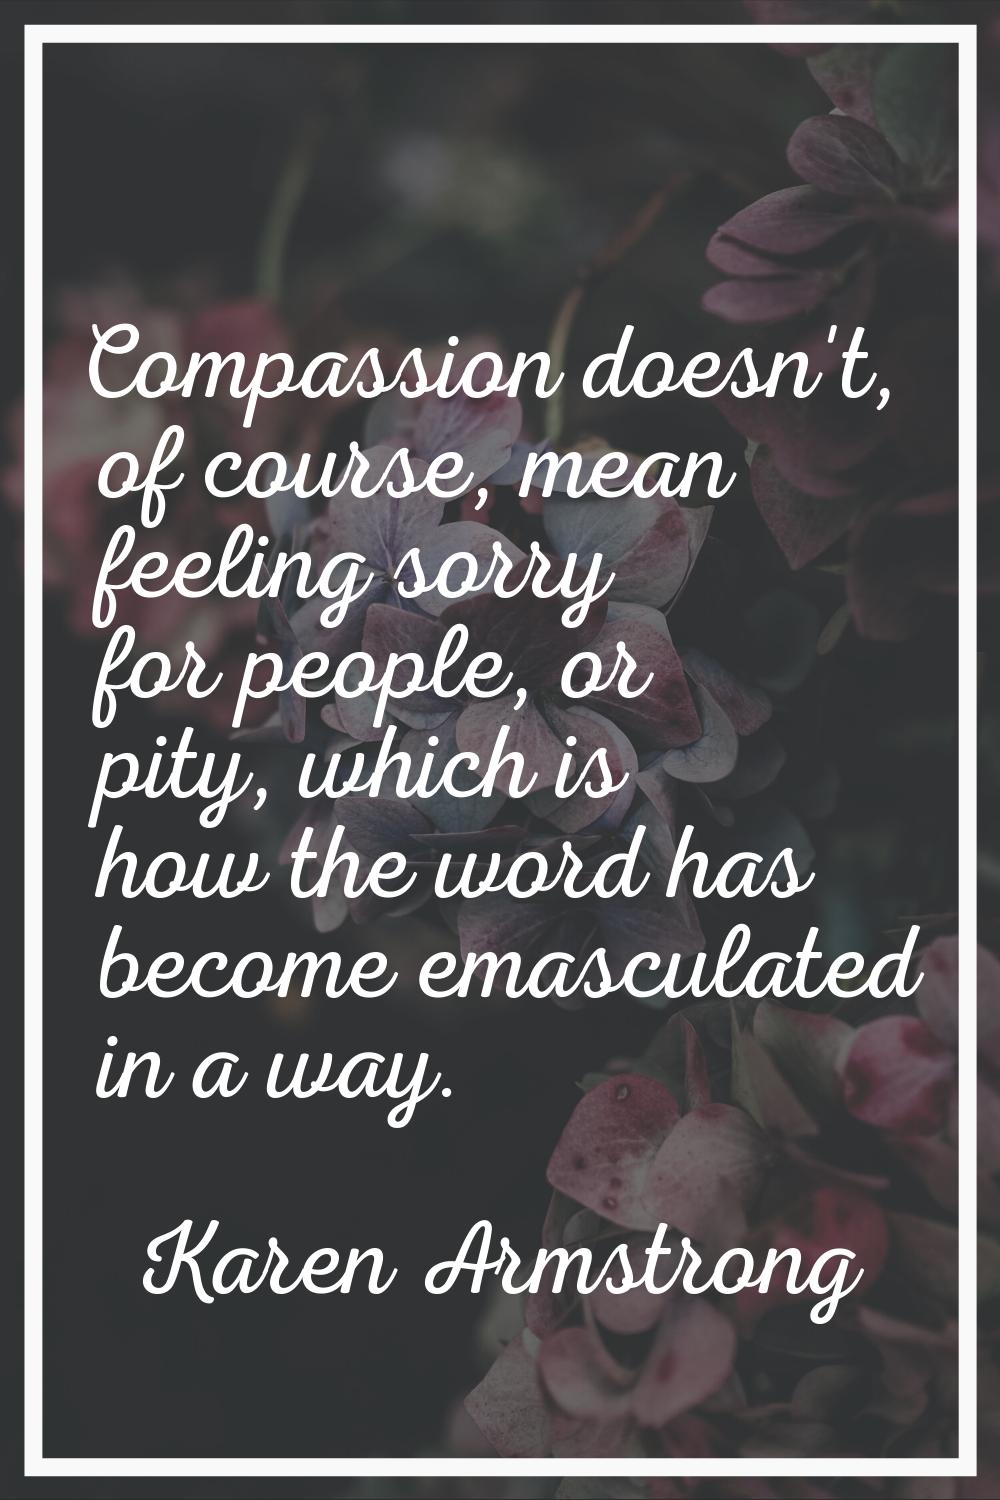 Compassion doesn't, of course, mean feeling sorry for people, or pity, which is how the word has be